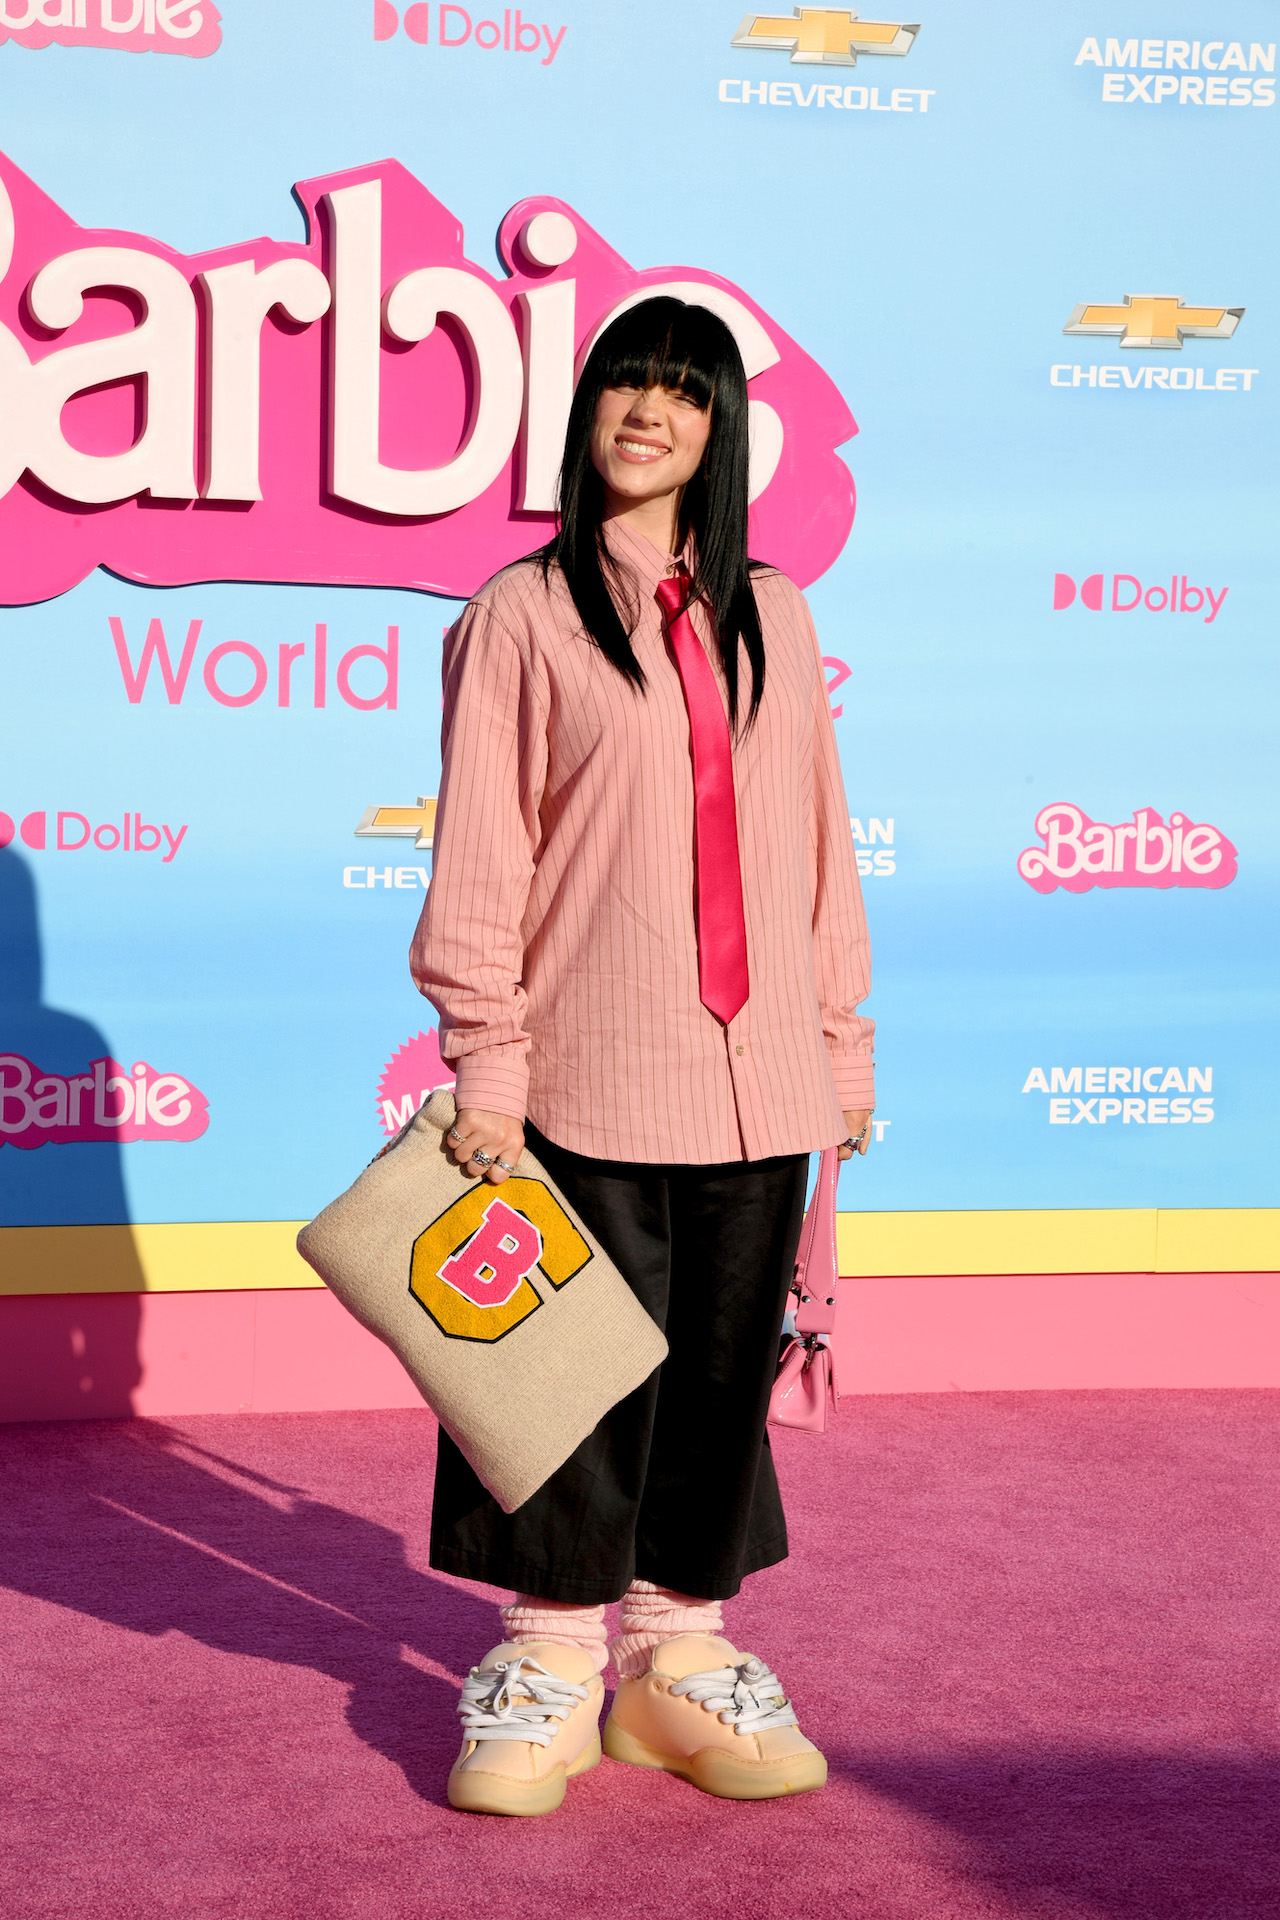 LOS ANGELES, CALIFORNIA - JULY 09: Billie Eilish attends the World Premiere of 